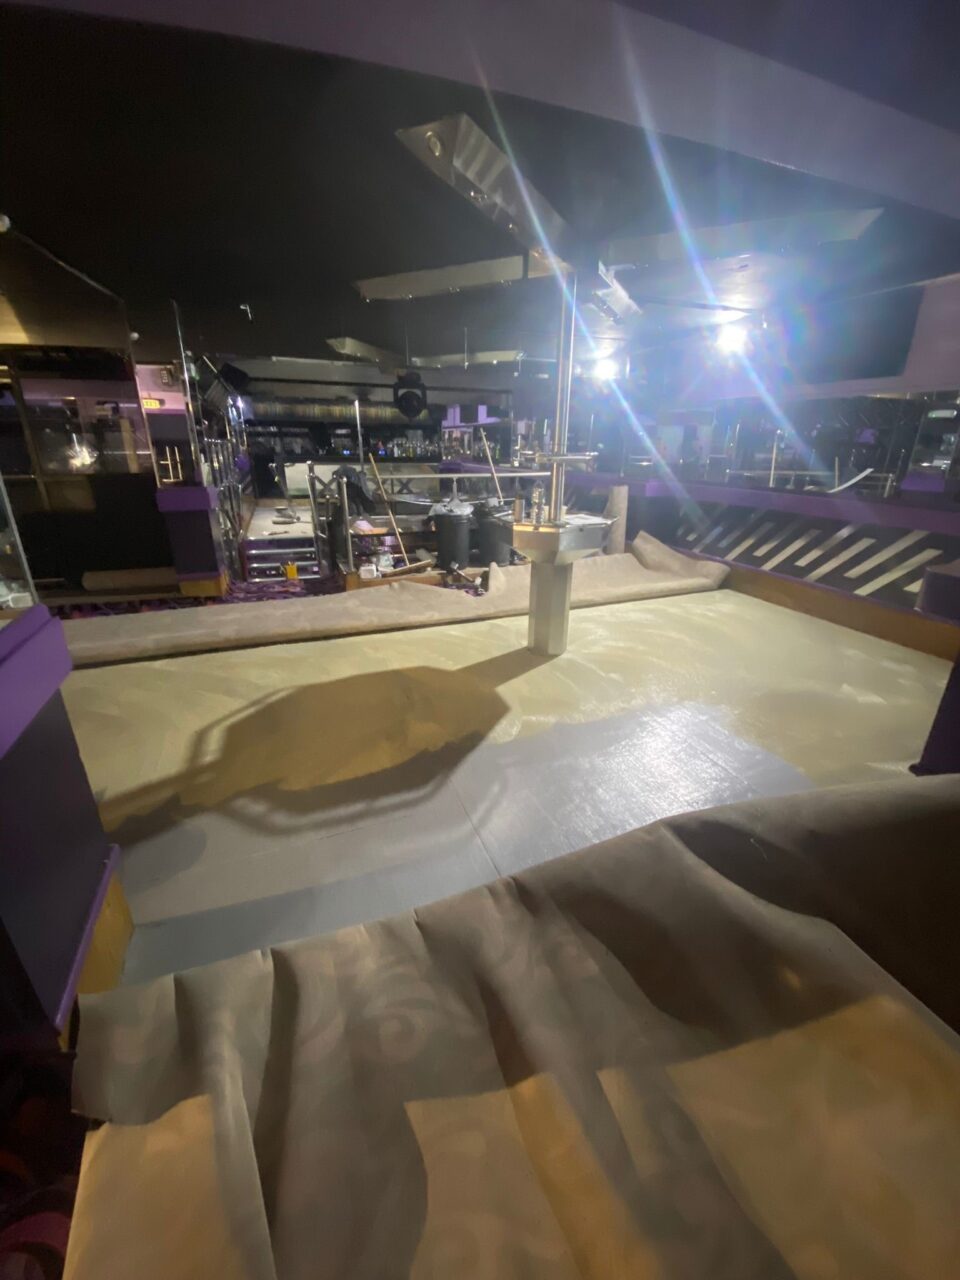 Acapulco Nightclub Halifax flooring midway through being replaced with carpets designed by Wilton Carpets